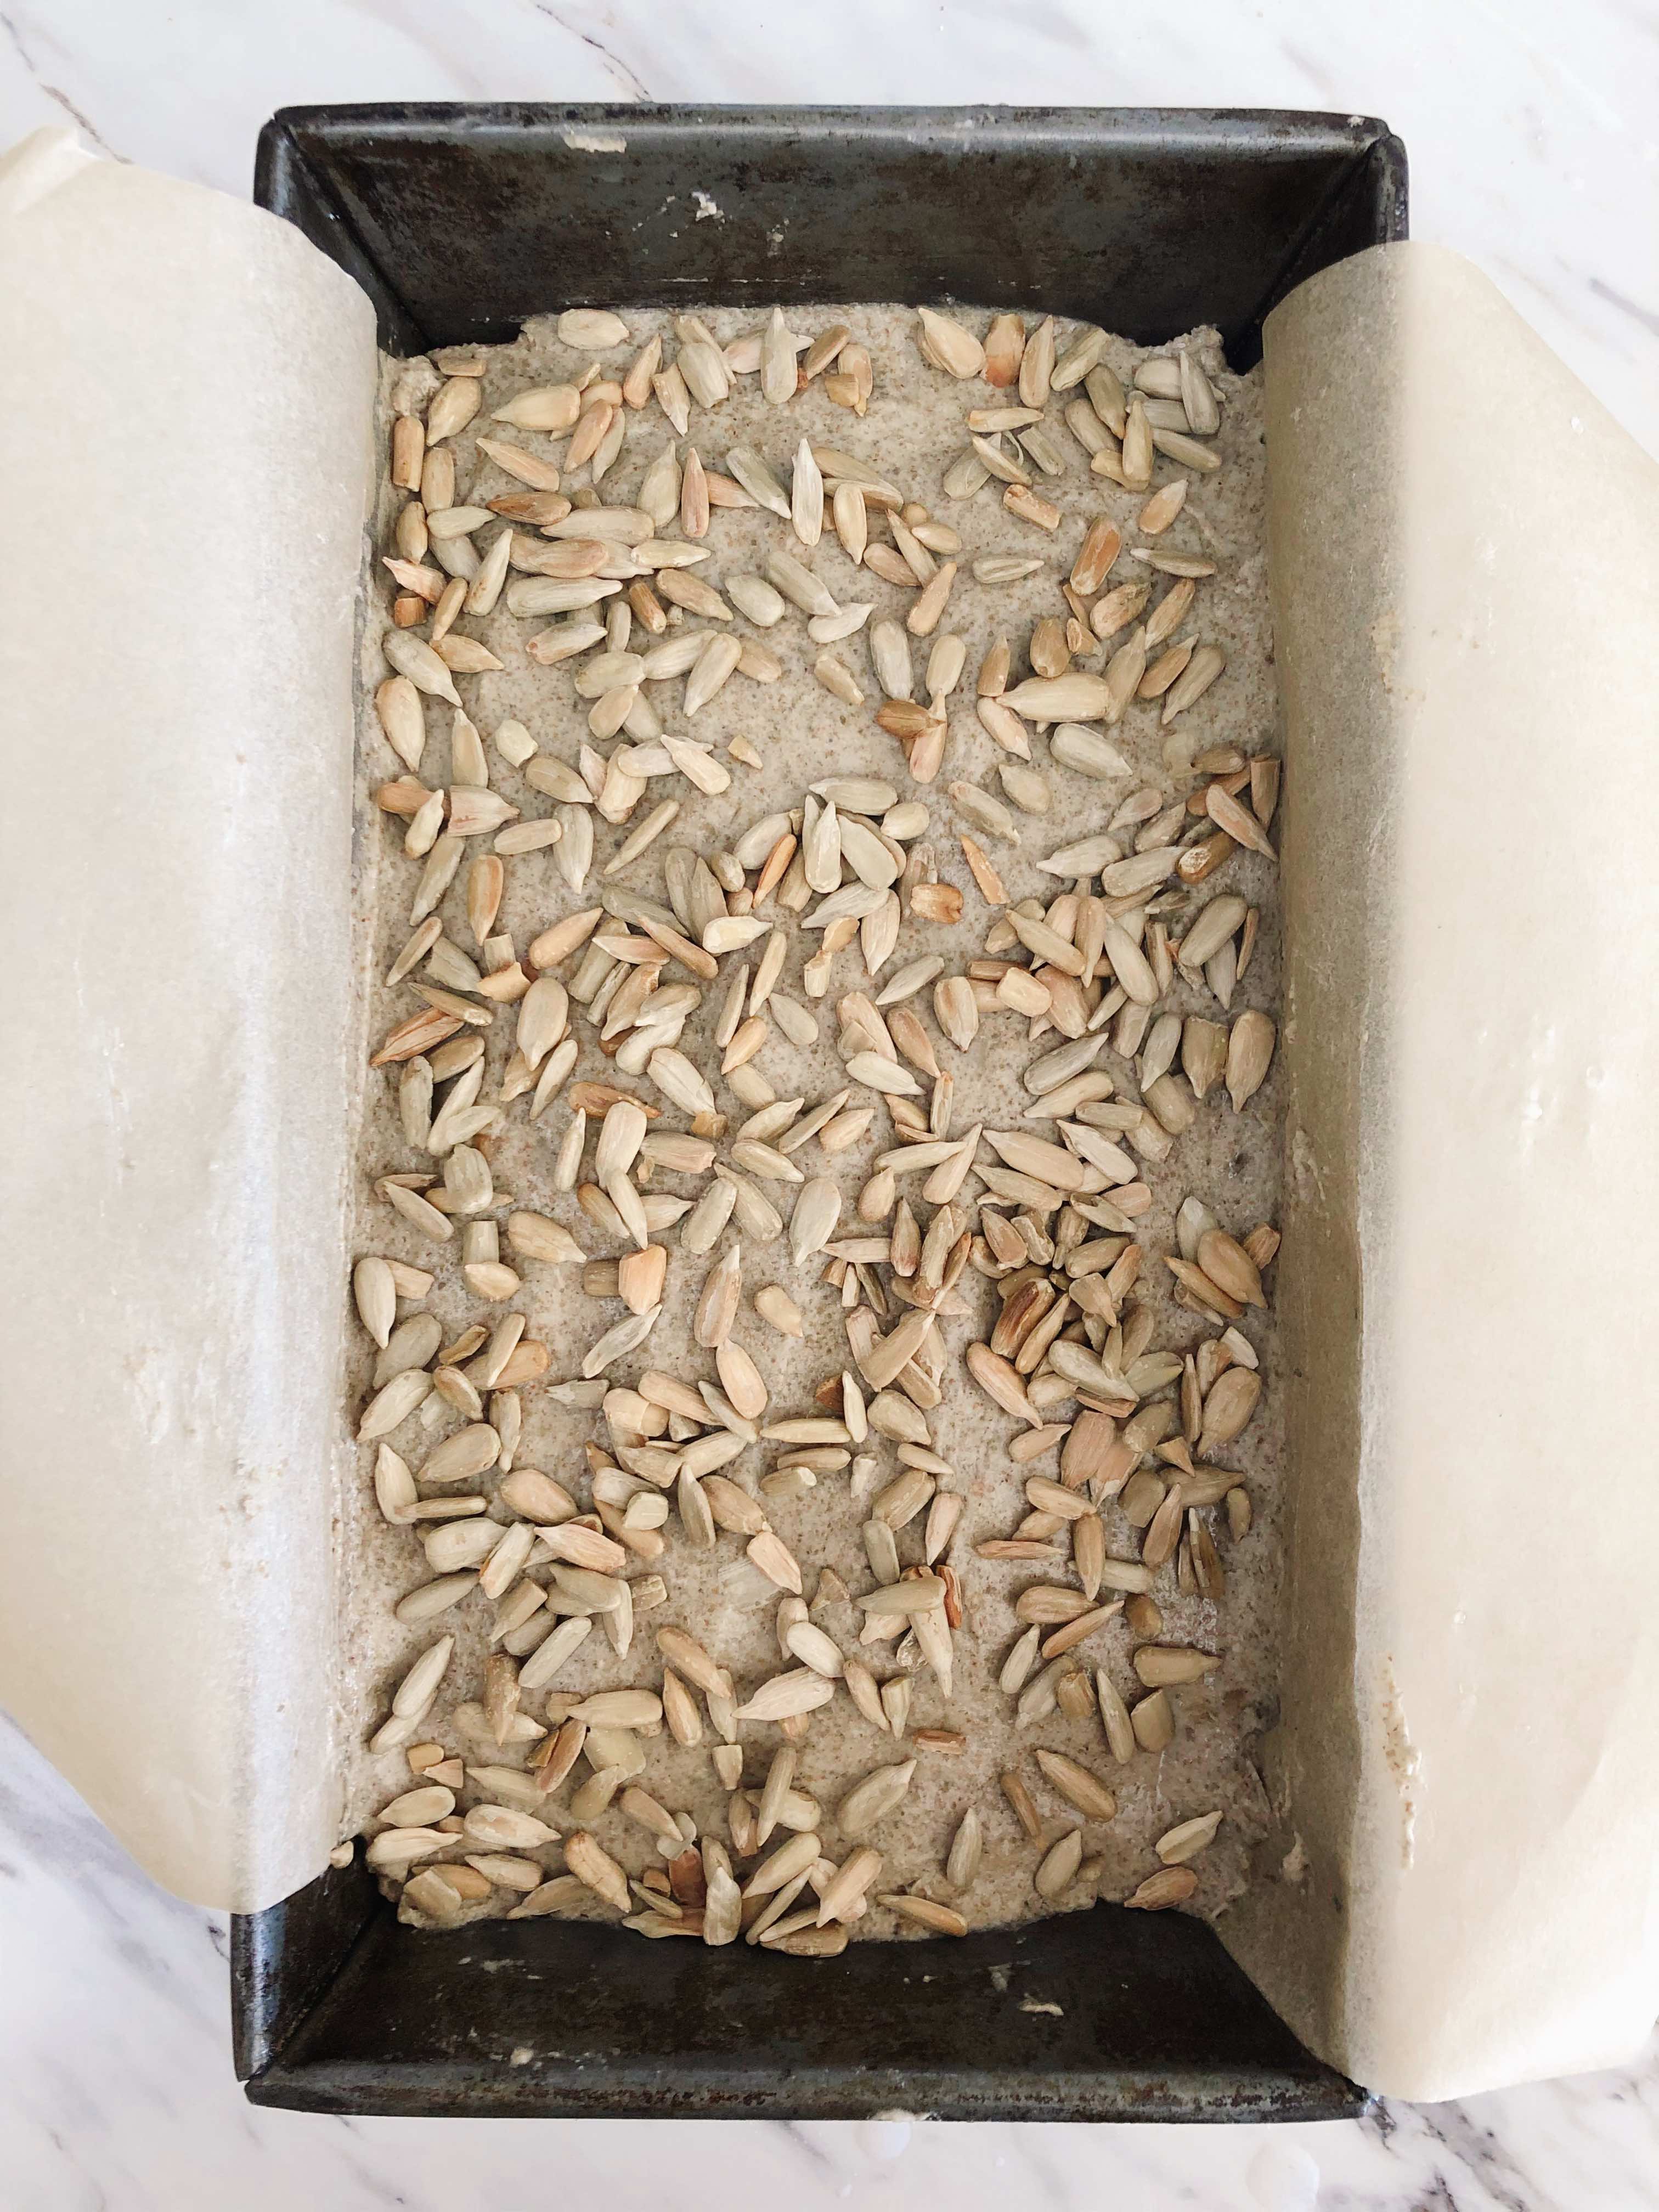 A loaf of whole grain rye sourdough bread with sunflower seeds on top before proofing